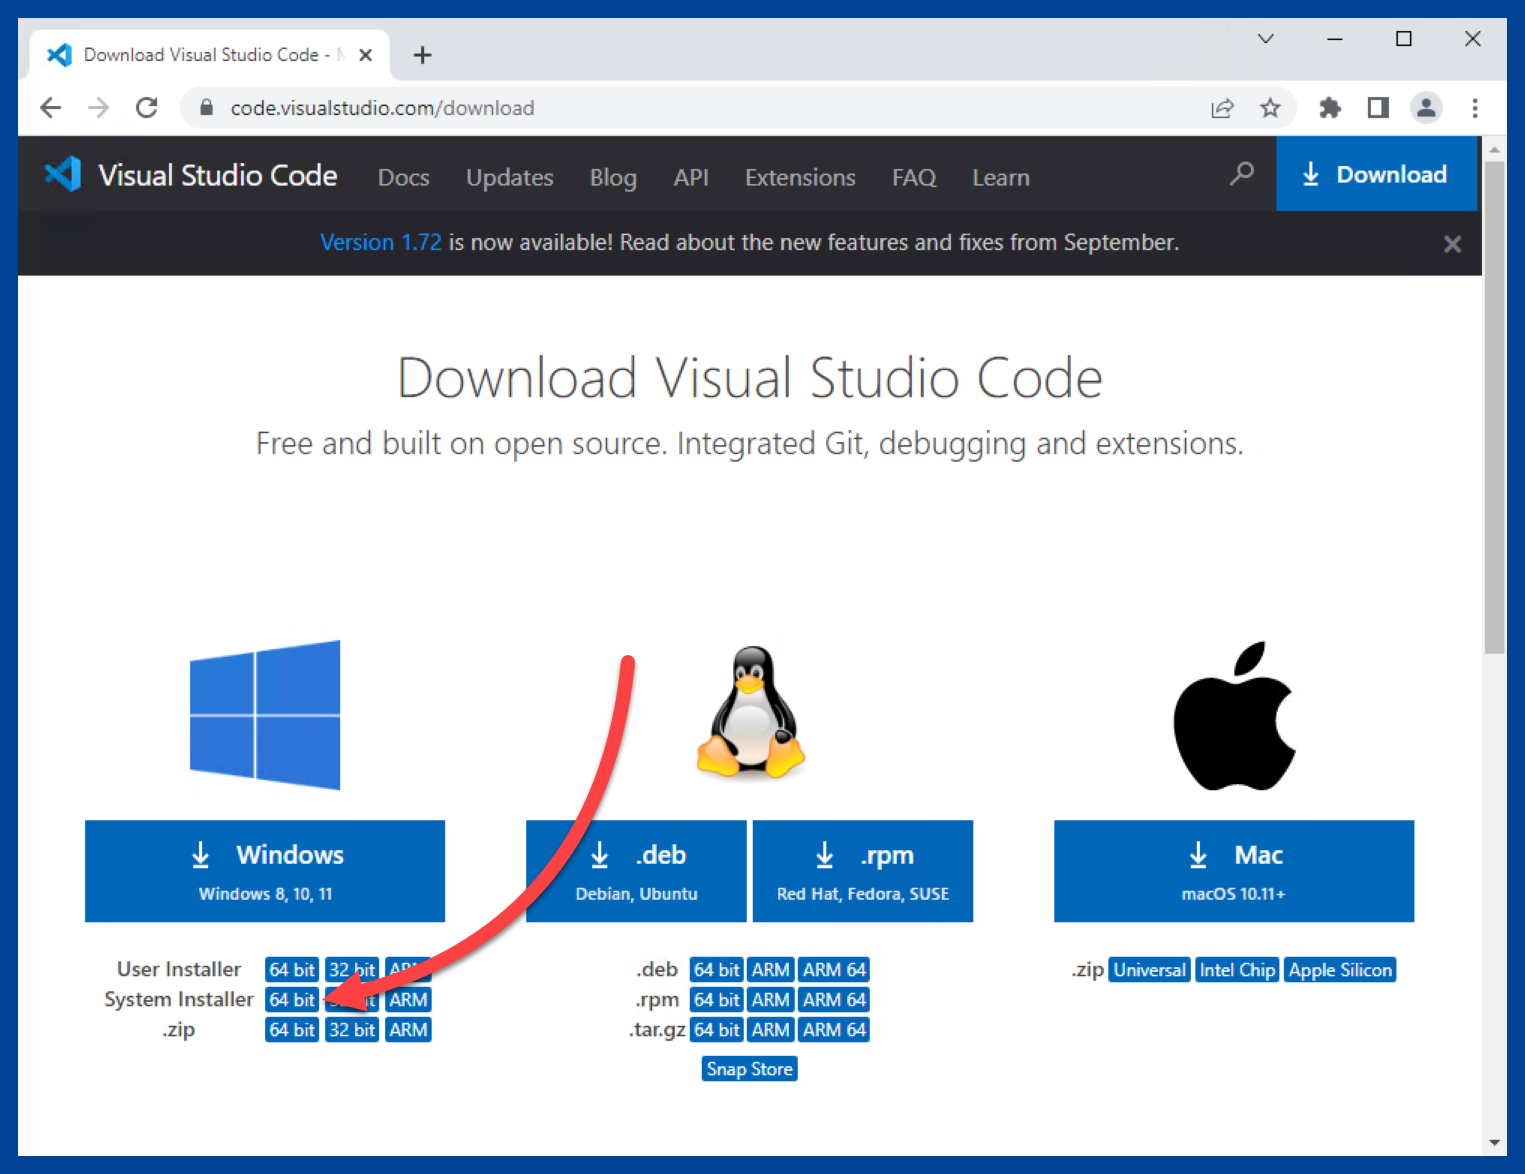 Select the VS Code system installer